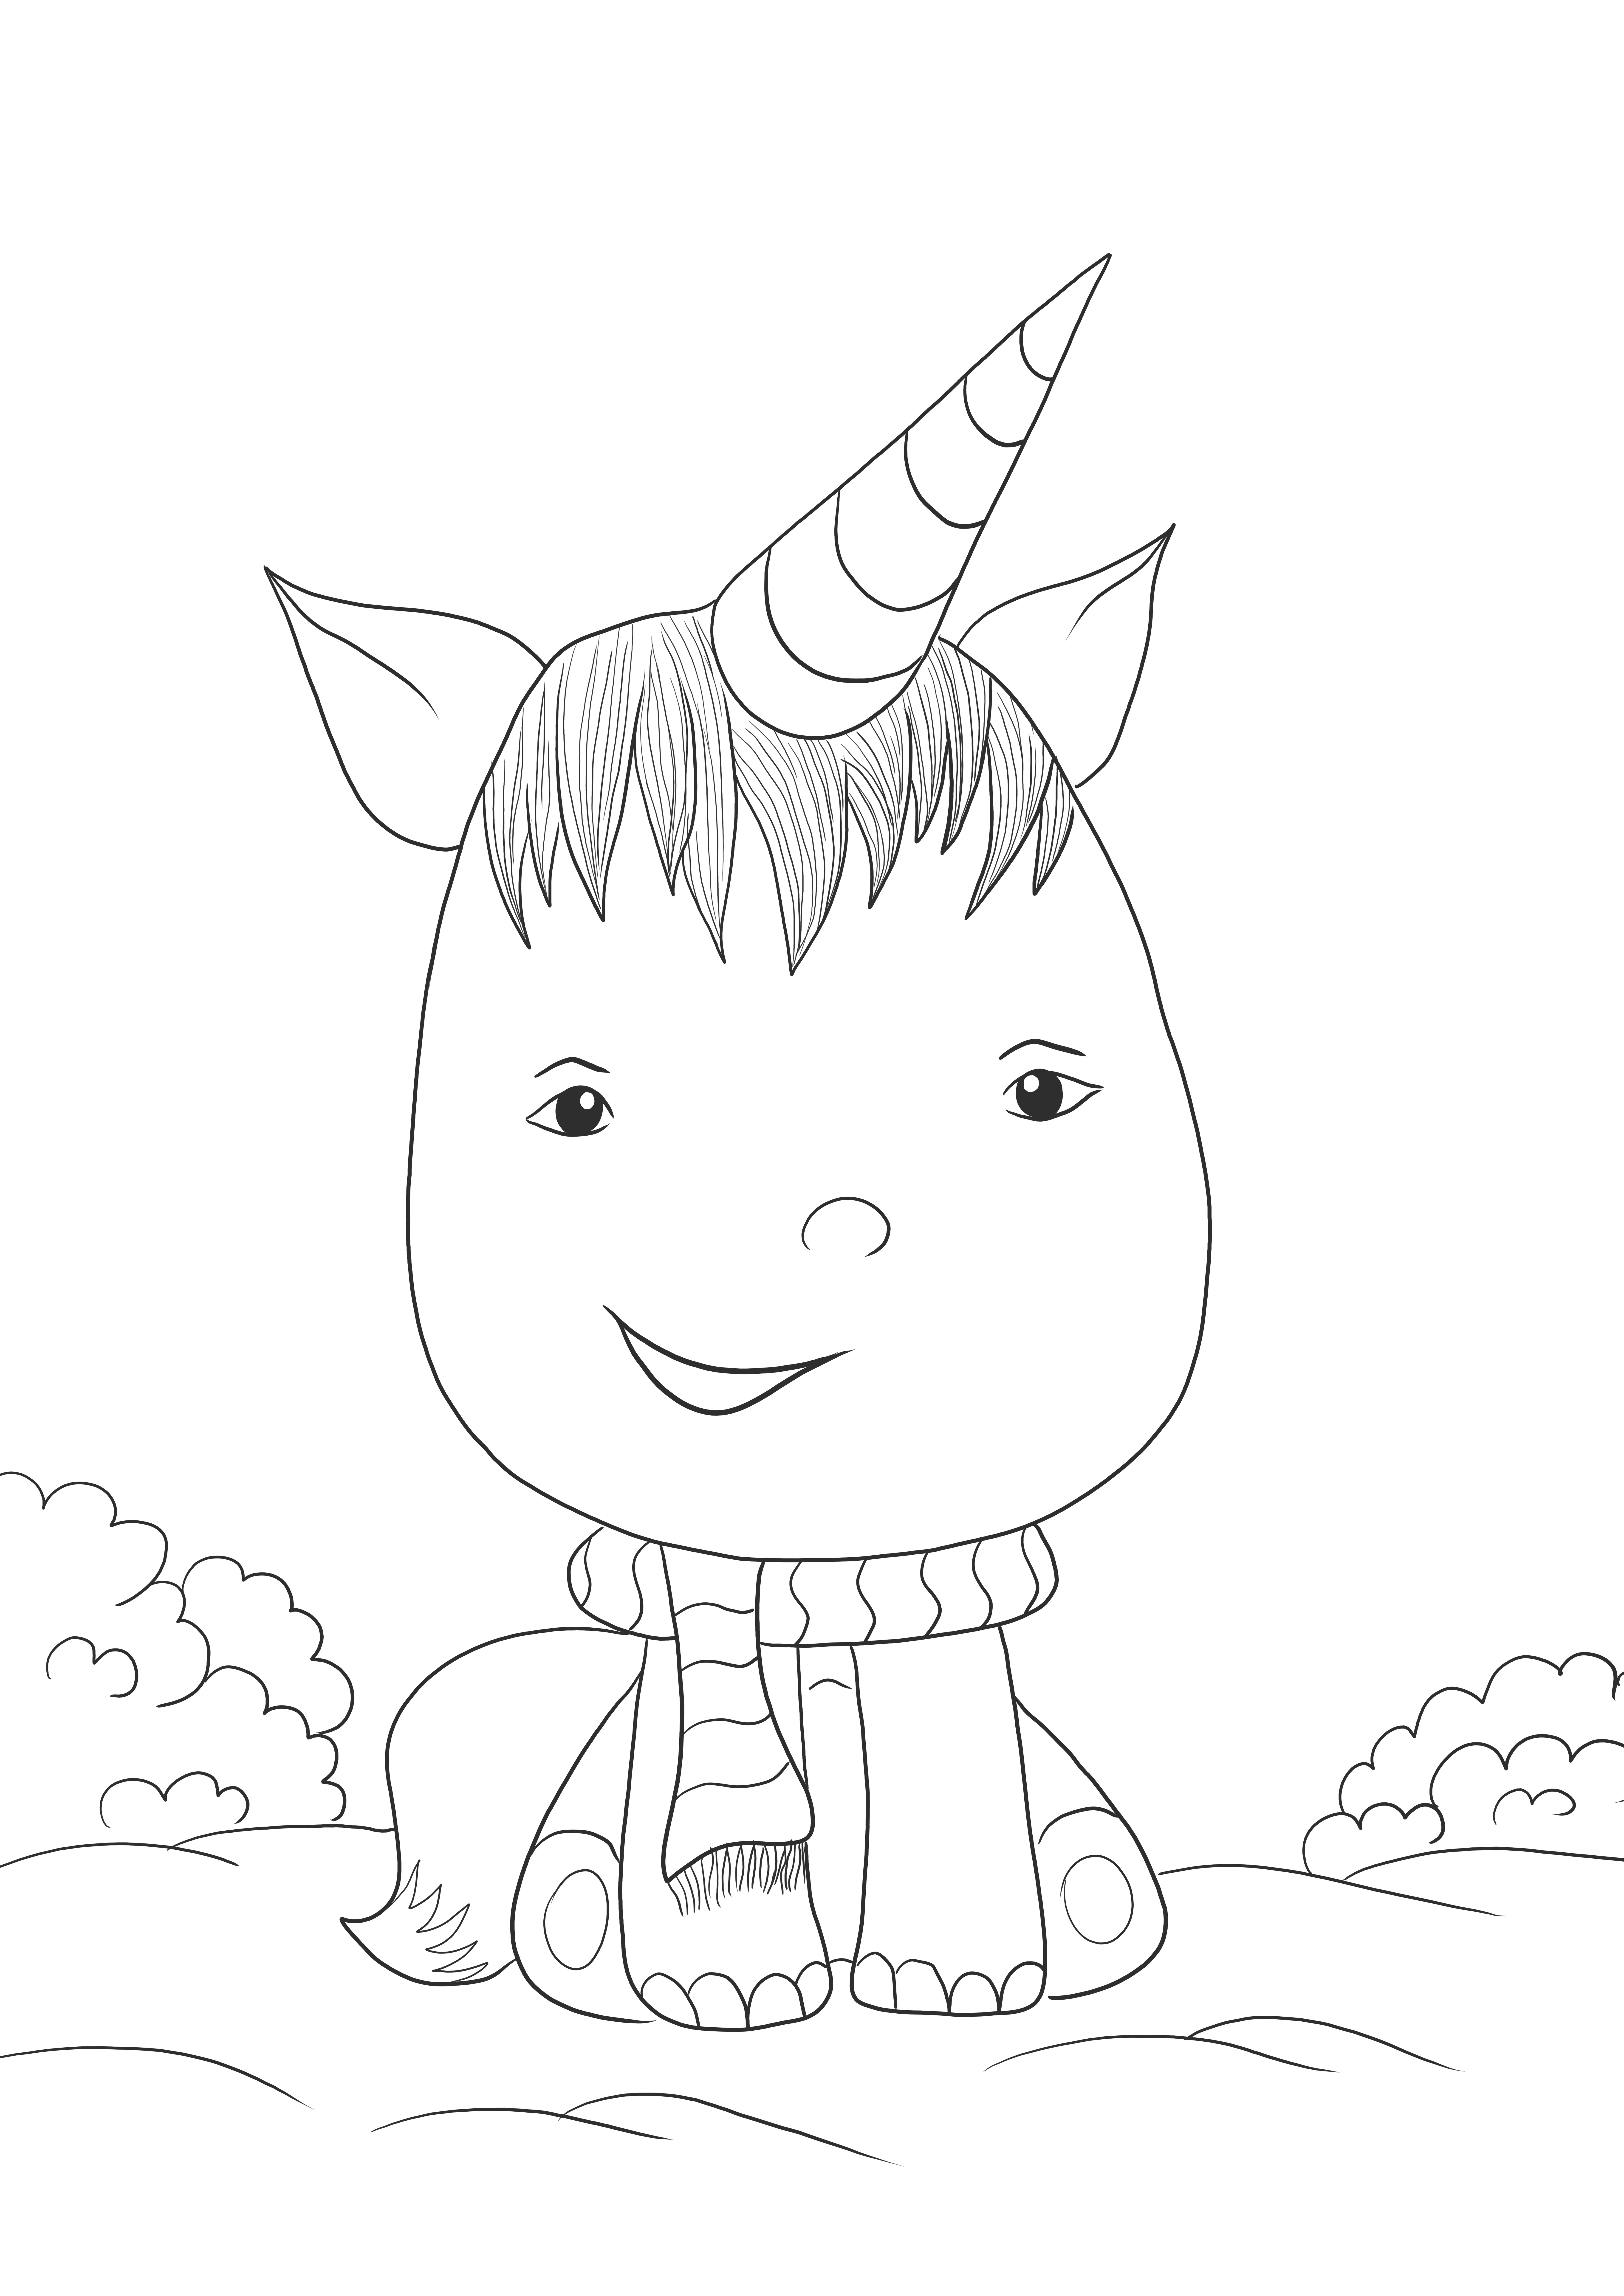 Kawaii Unicorn to download or print for free and color